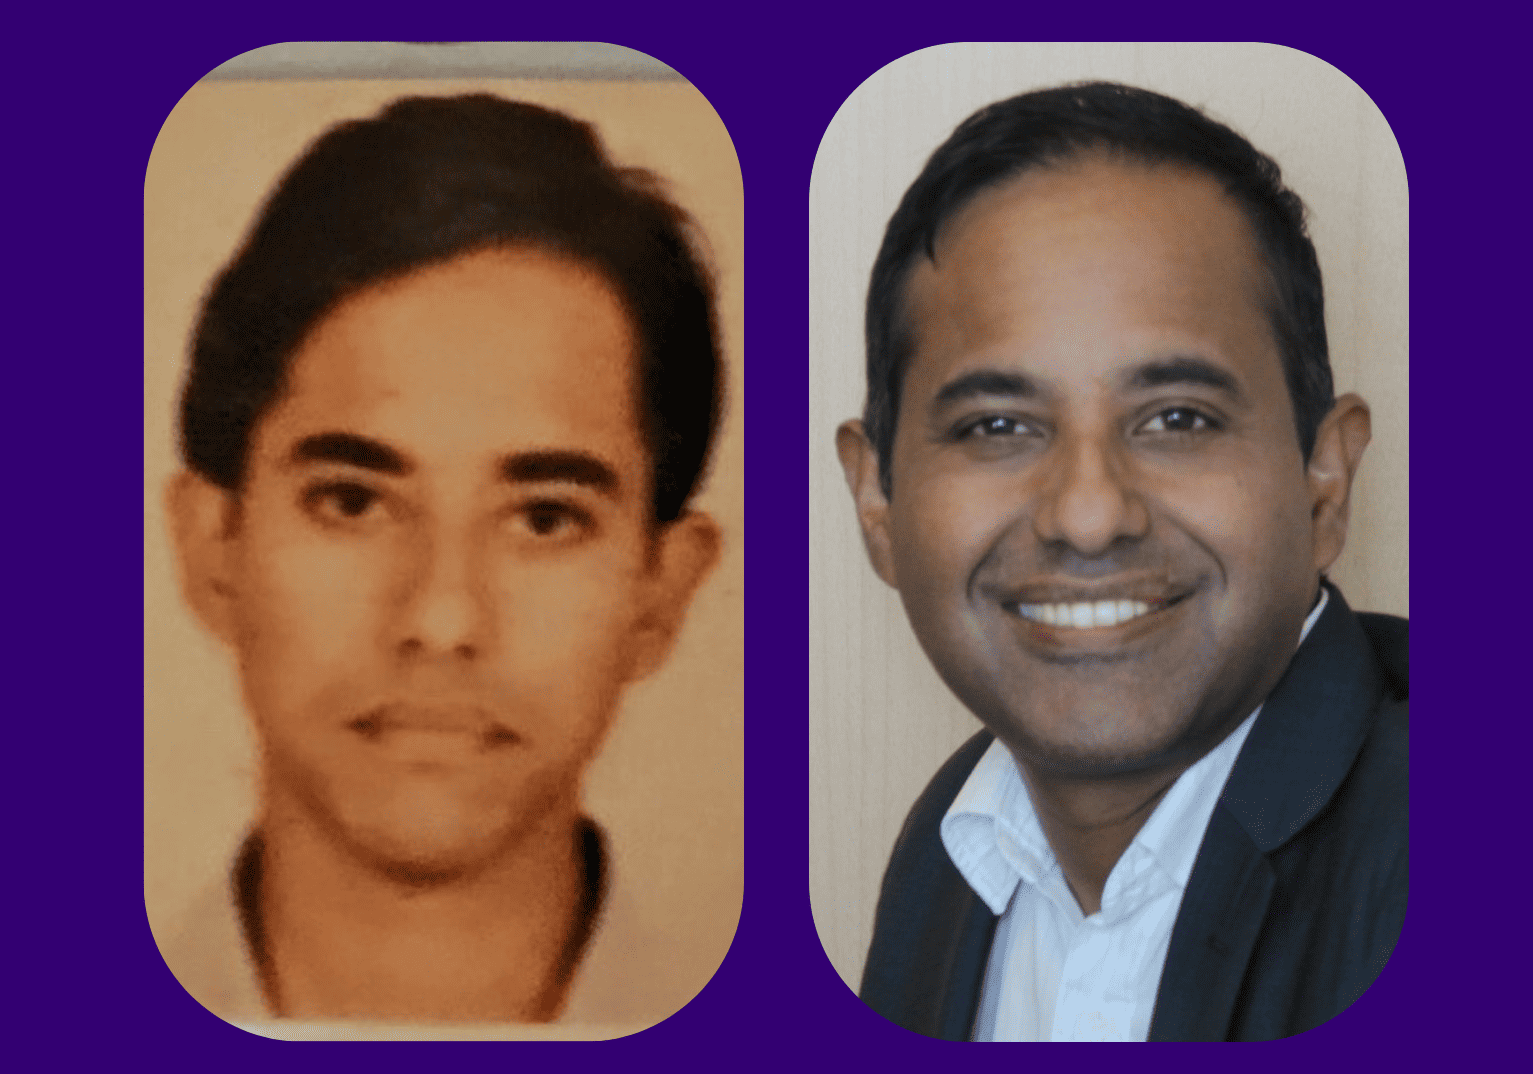 A picture of Dr Ahmed aged 18 and a picture of Dr Ahmed today, smiling 